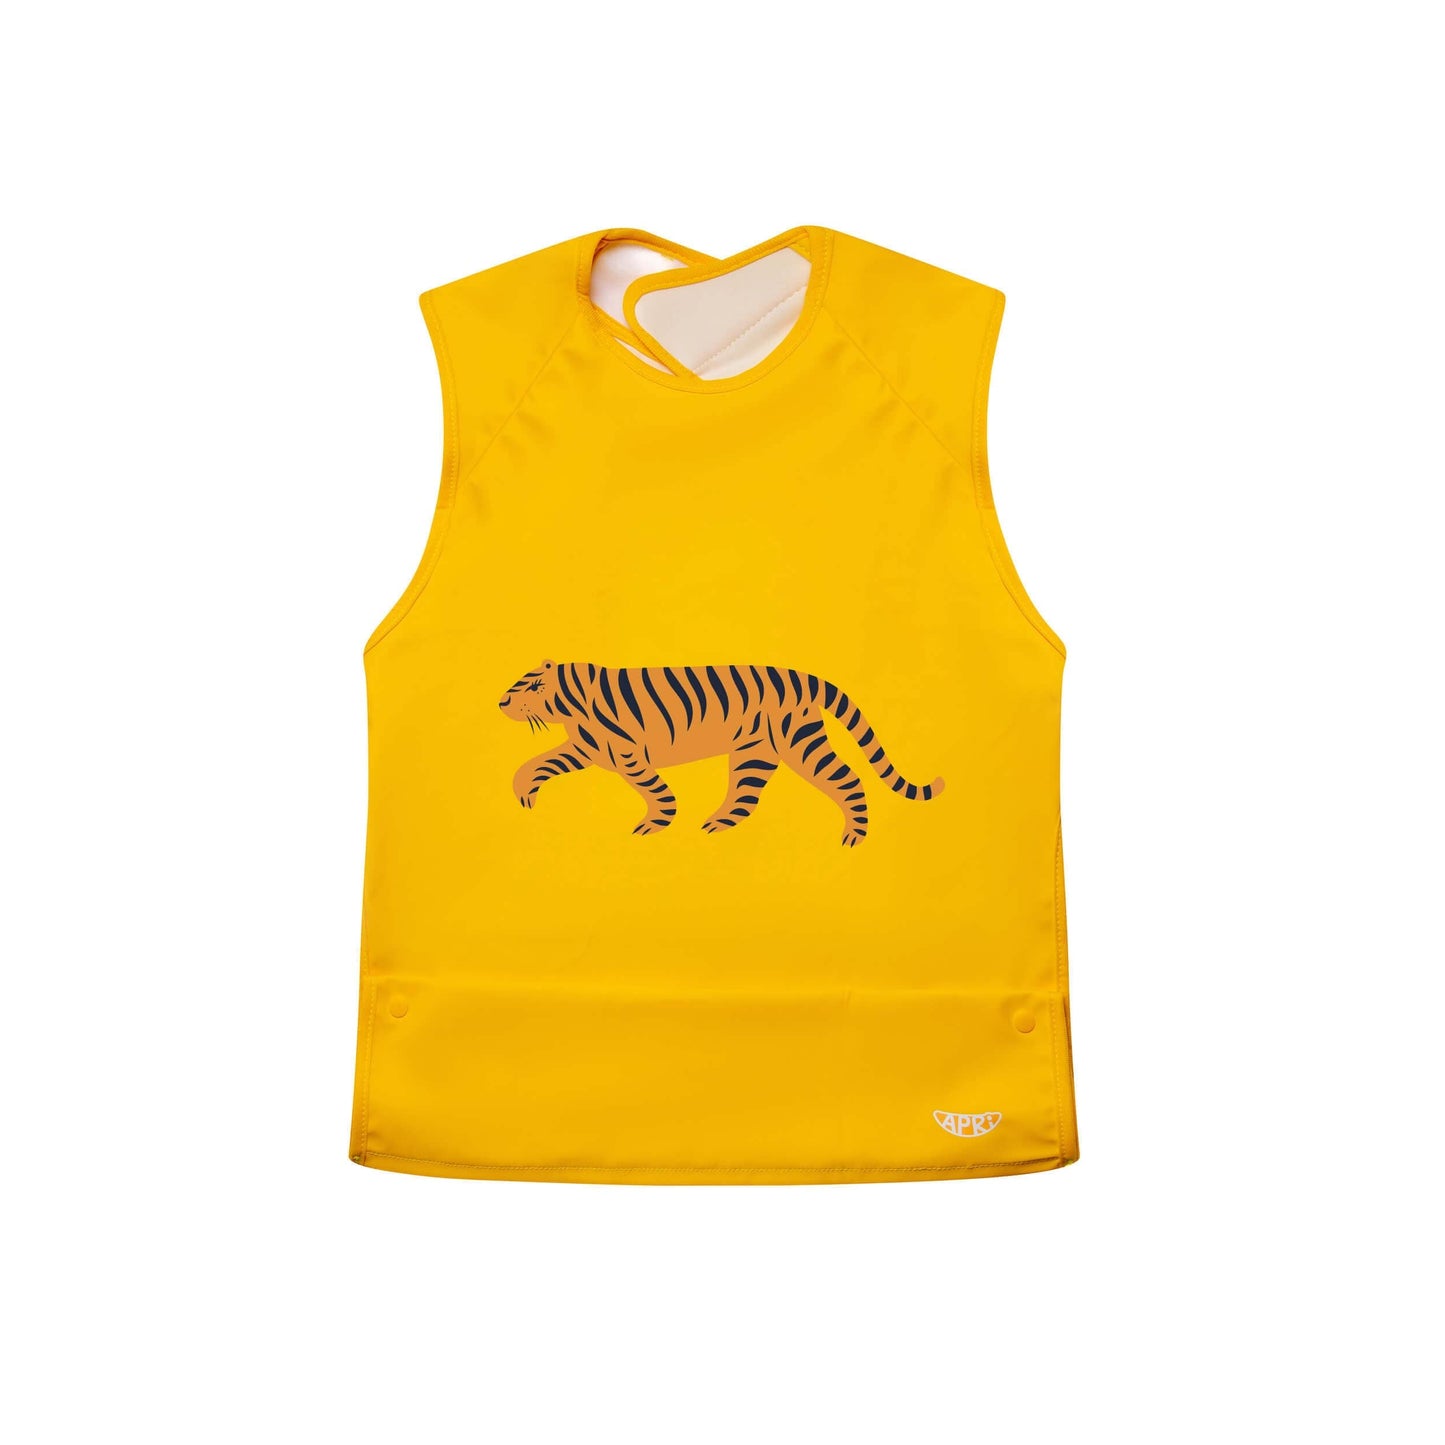 Reusable bib for kids, teens and adults with disabilities. Yellow cap-sleeve tiger picture with food collection pocket by Apri 